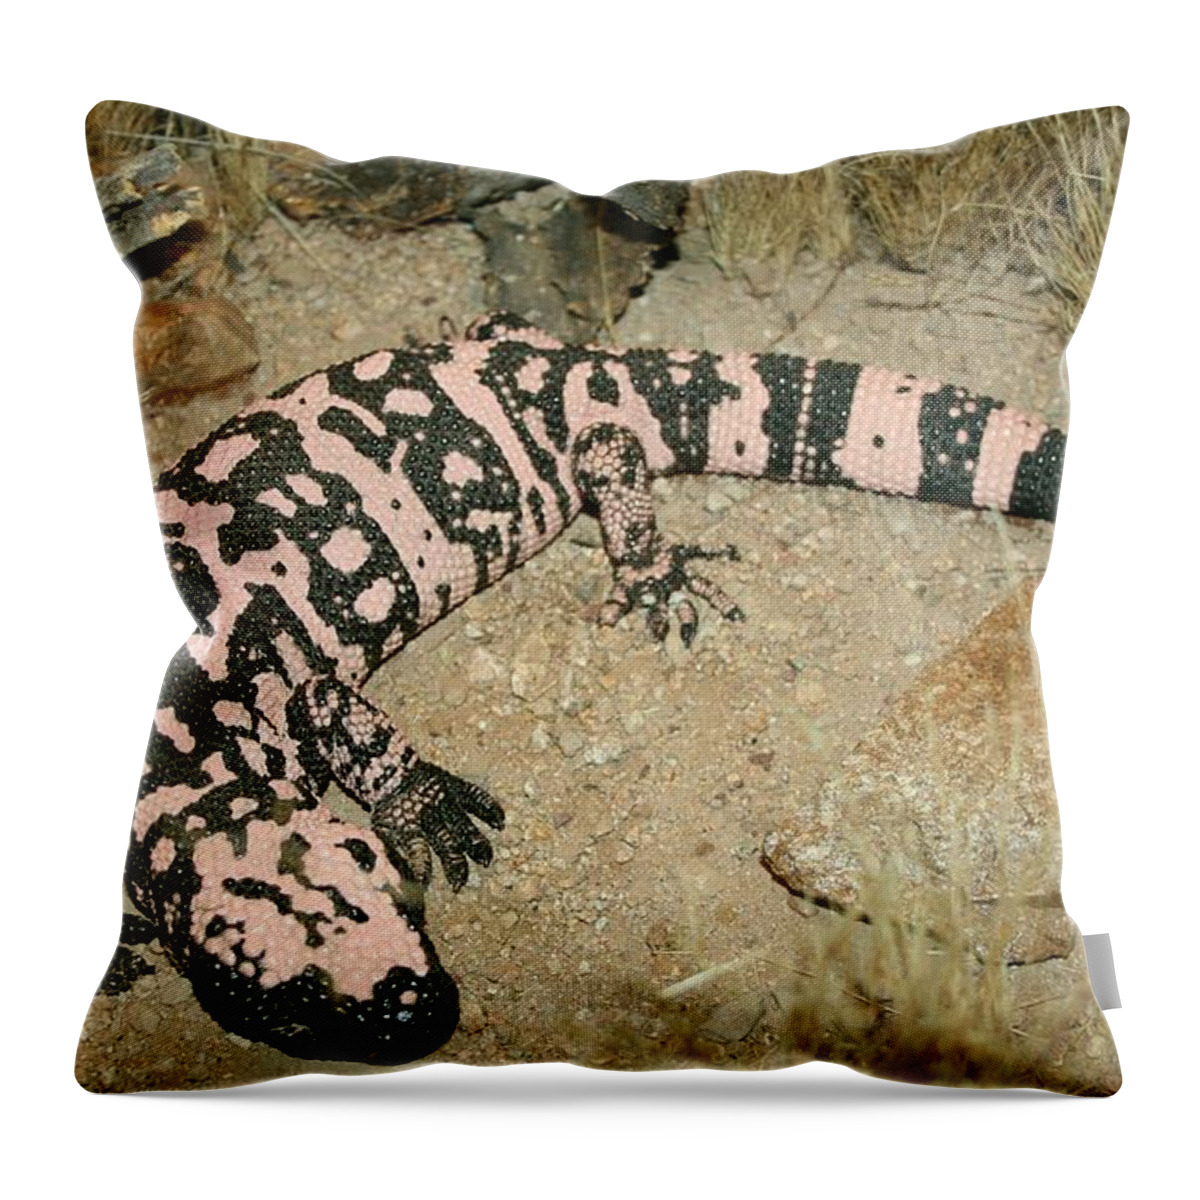 Gila Monster Throw Pillow featuring the photograph Gila Monster by Christiane Schulze Art And Photography